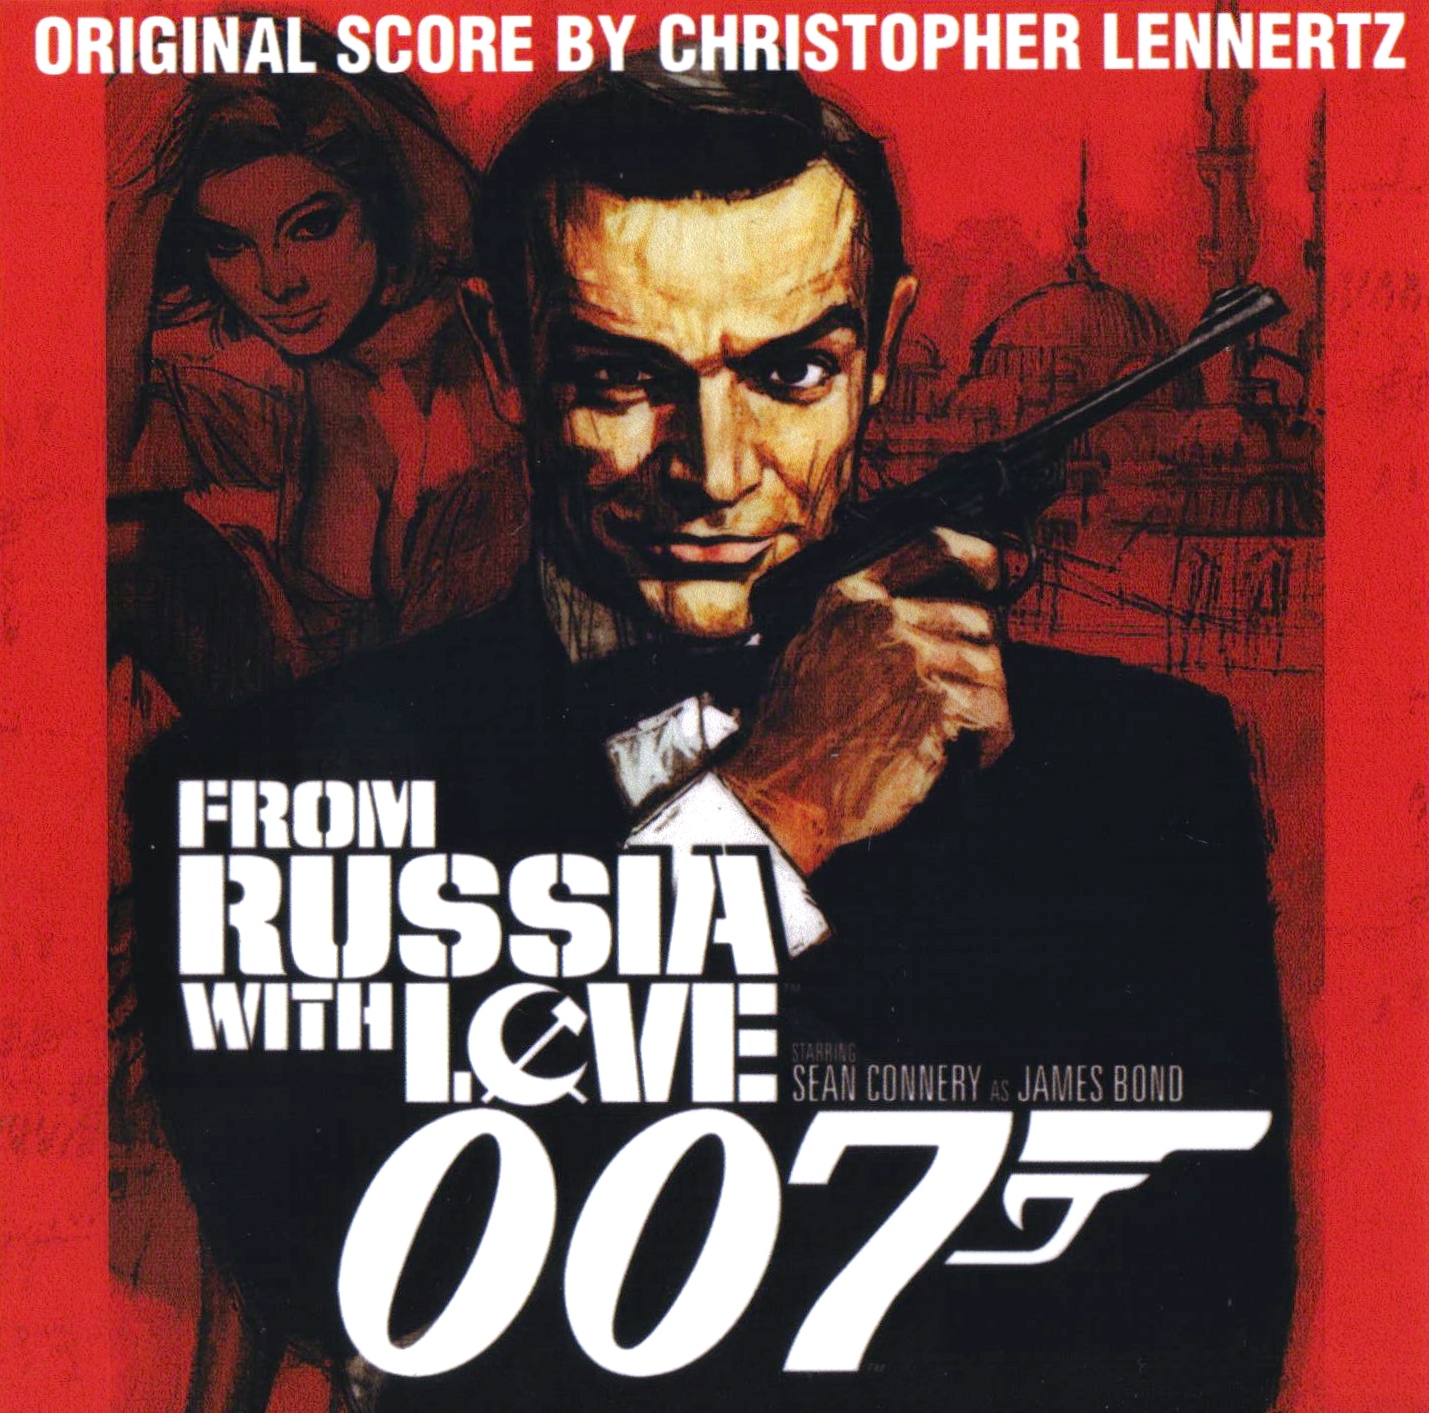 James Bond 007: from Russia with Love. Sean Connery from Russia with Love. Агент 007 from Russia with Love. From Russia with Love James Bond. 007 from russia with love